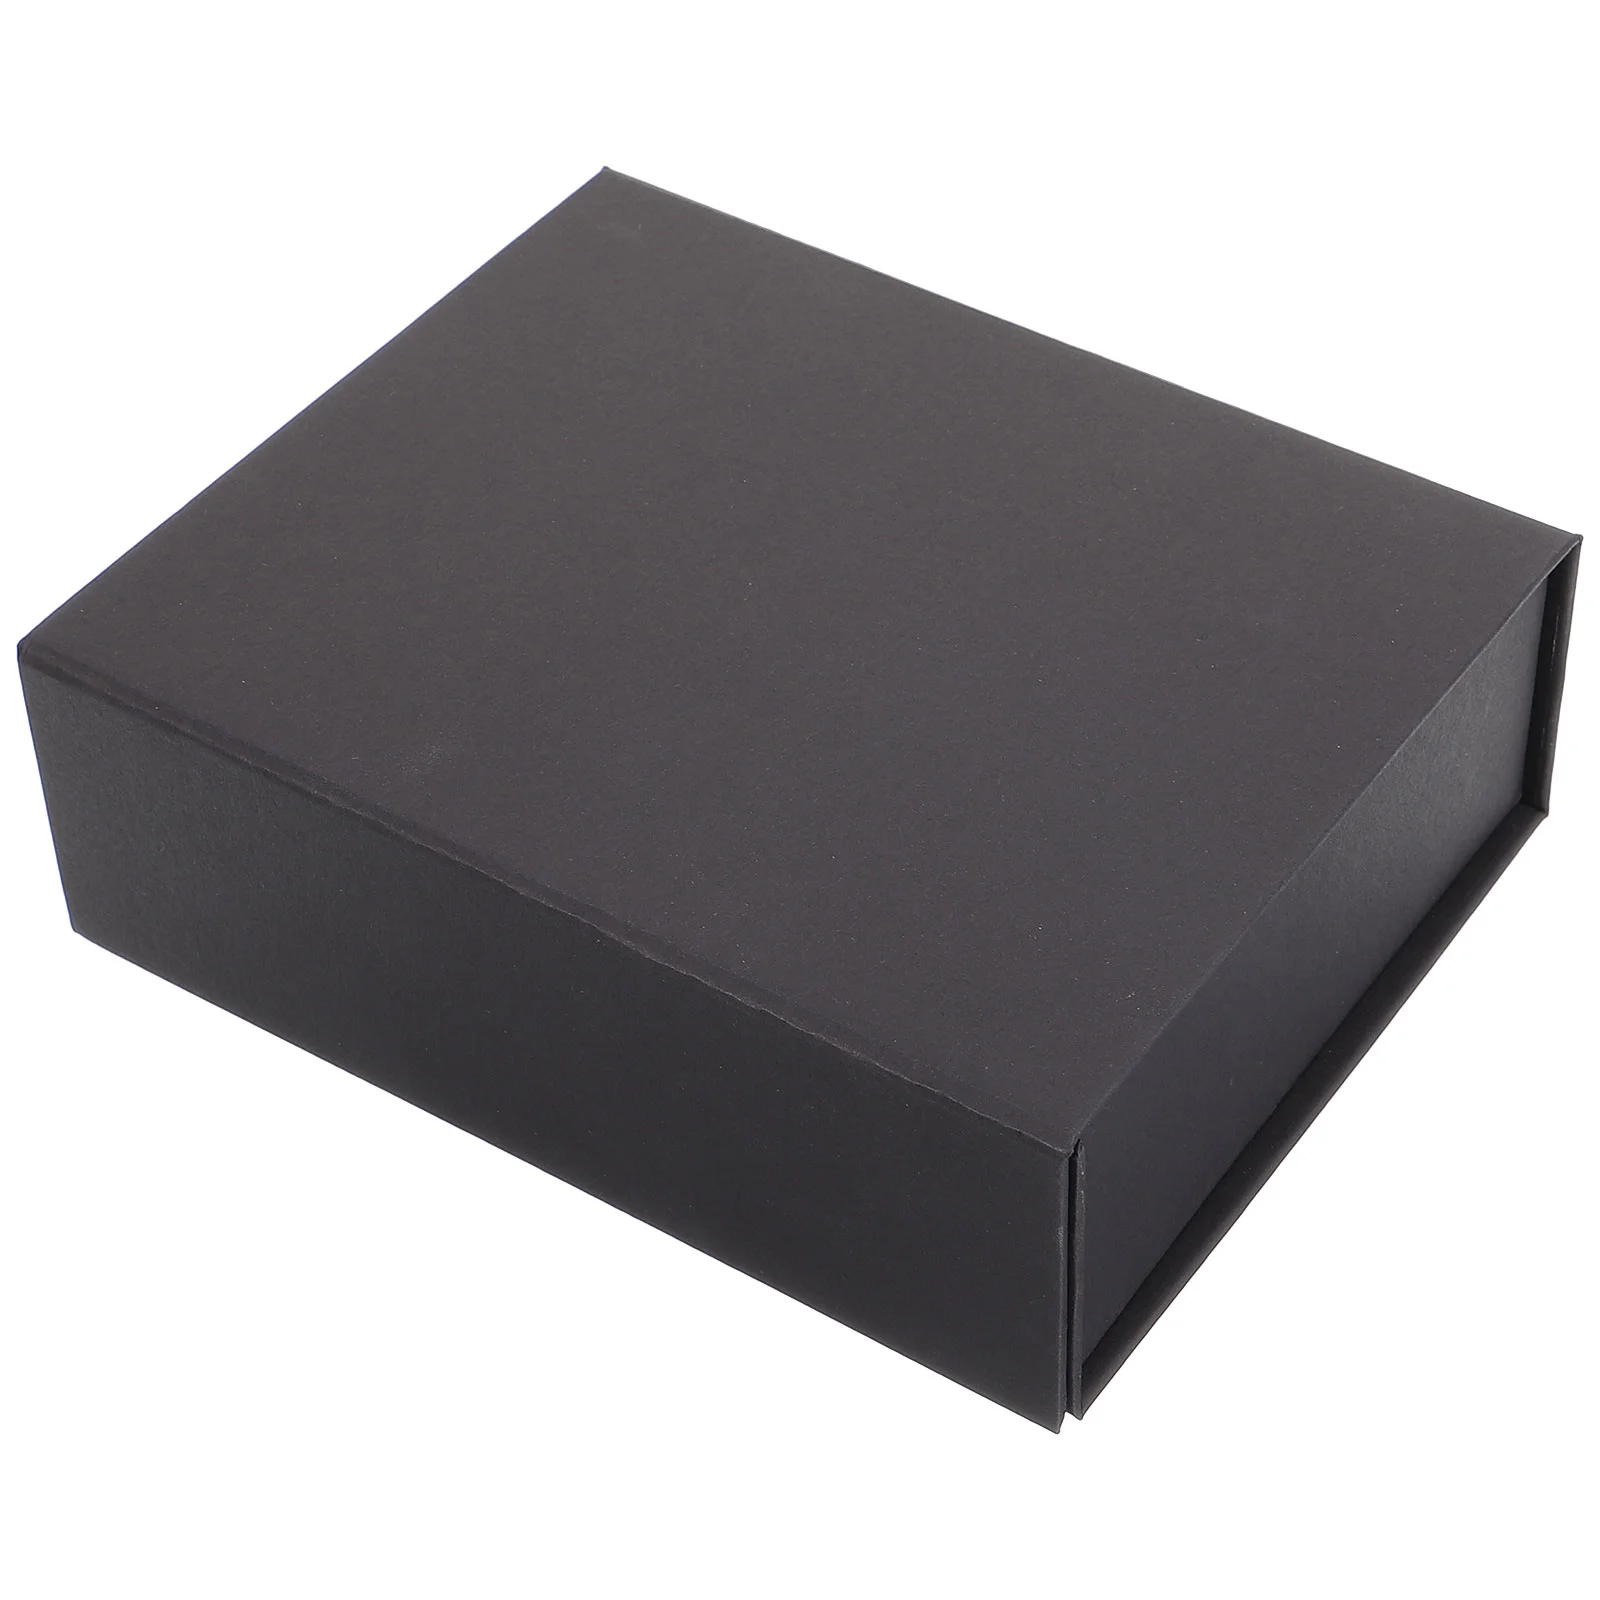 

Rectangular Gift Box Collapsible Cardboard Box With Magnetic Closure Lid Wedding Birthday Party Packaging Boxes